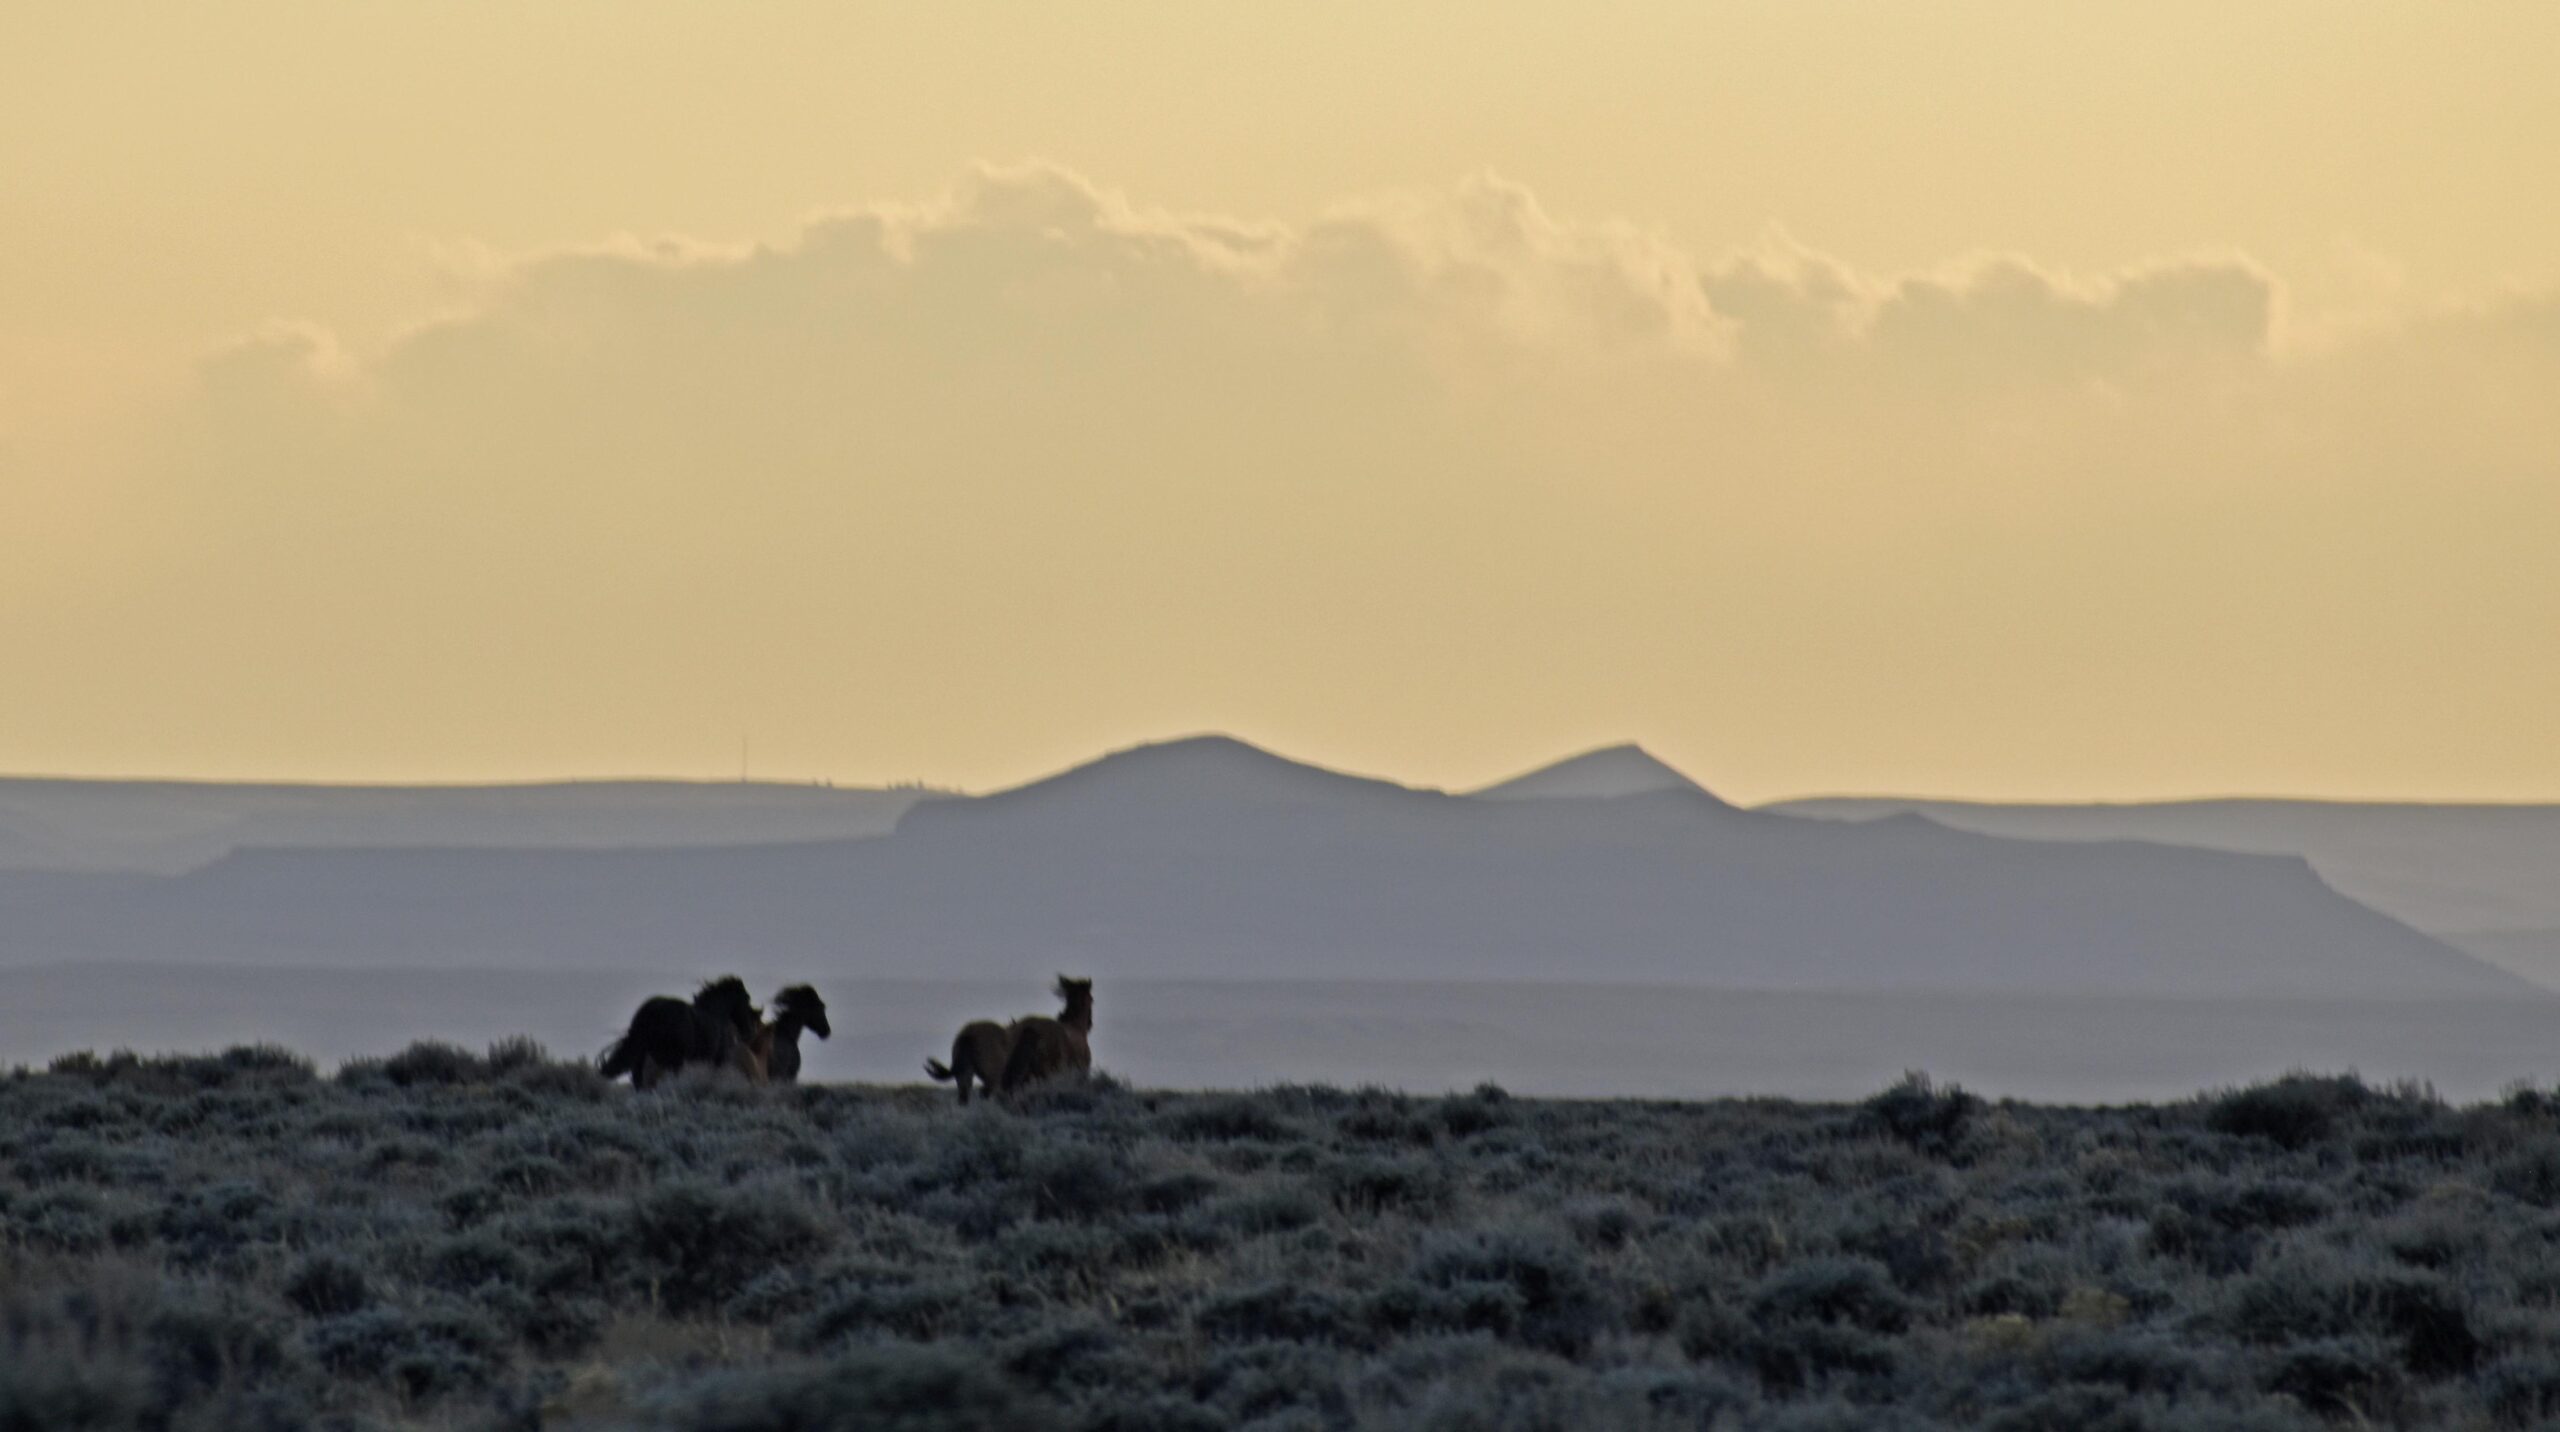 Livestock industry’s campaign to get rid of wild horses is a scam to cheat the taxpayers